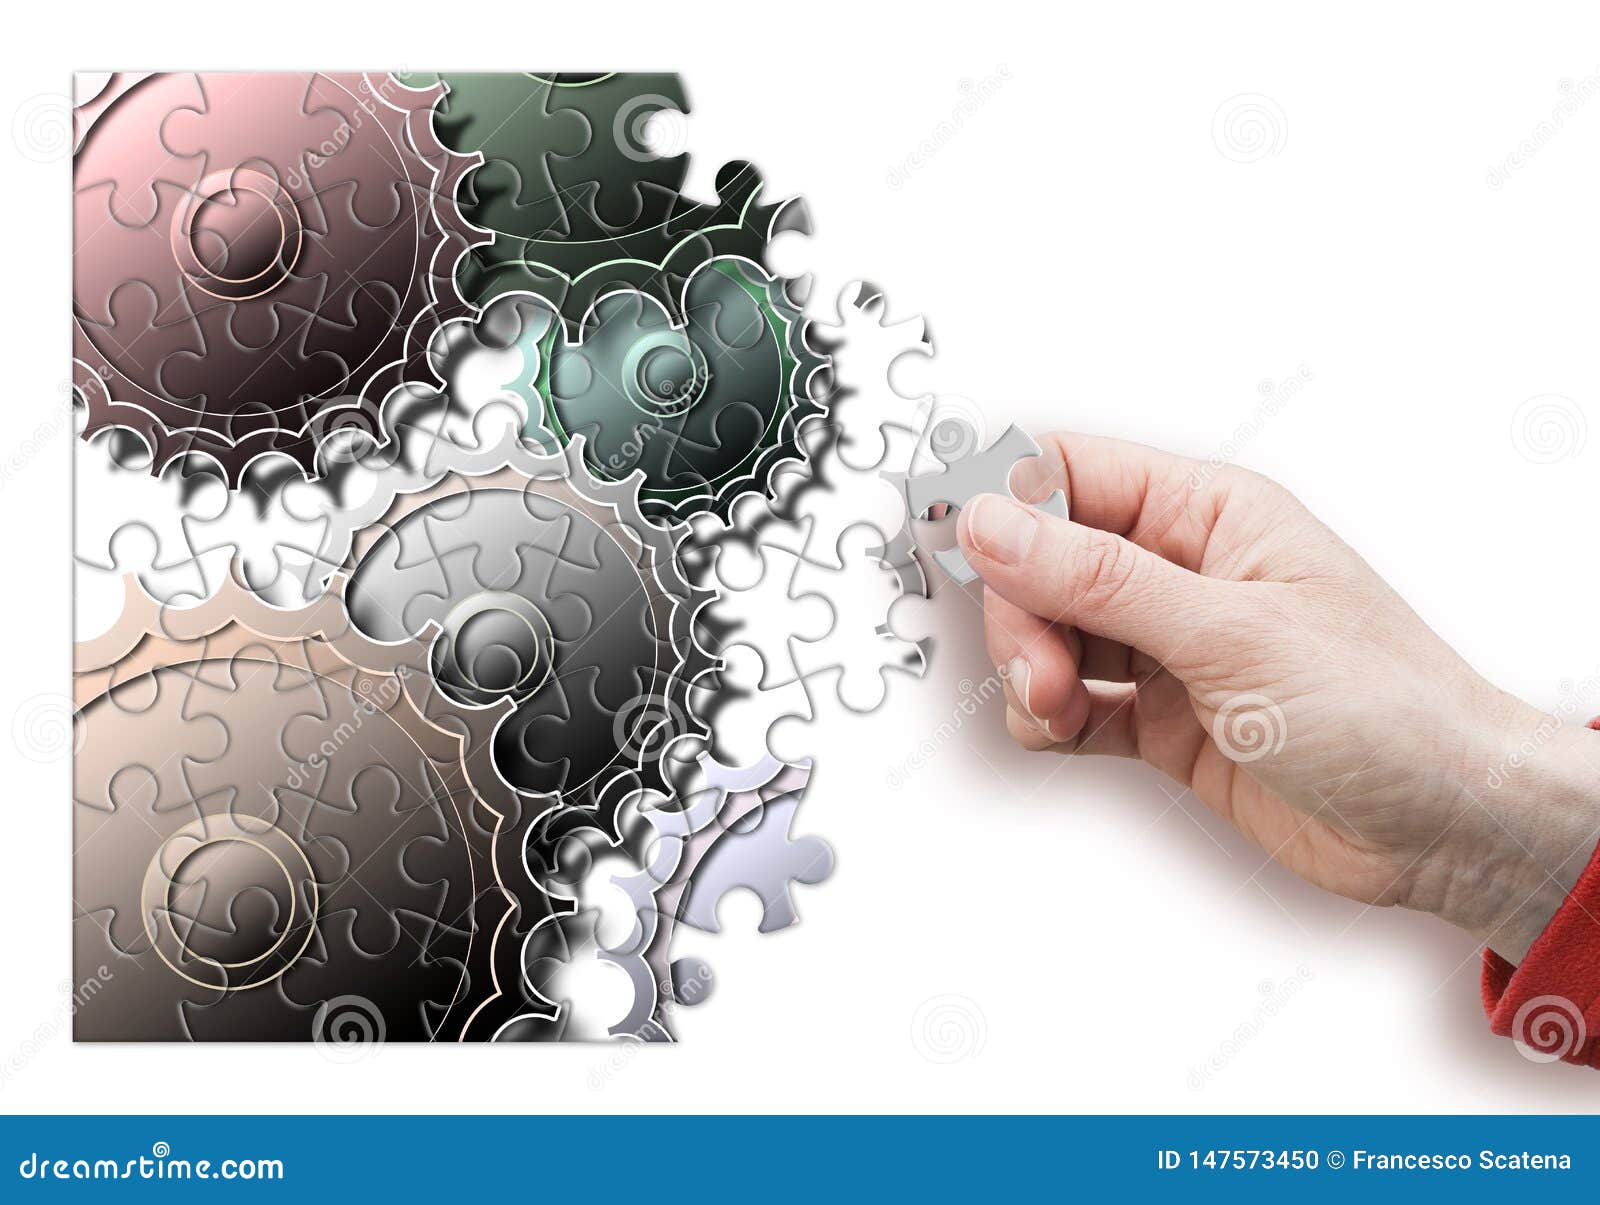 female hand disassemble and assemble a gear - concept image in puzzle 